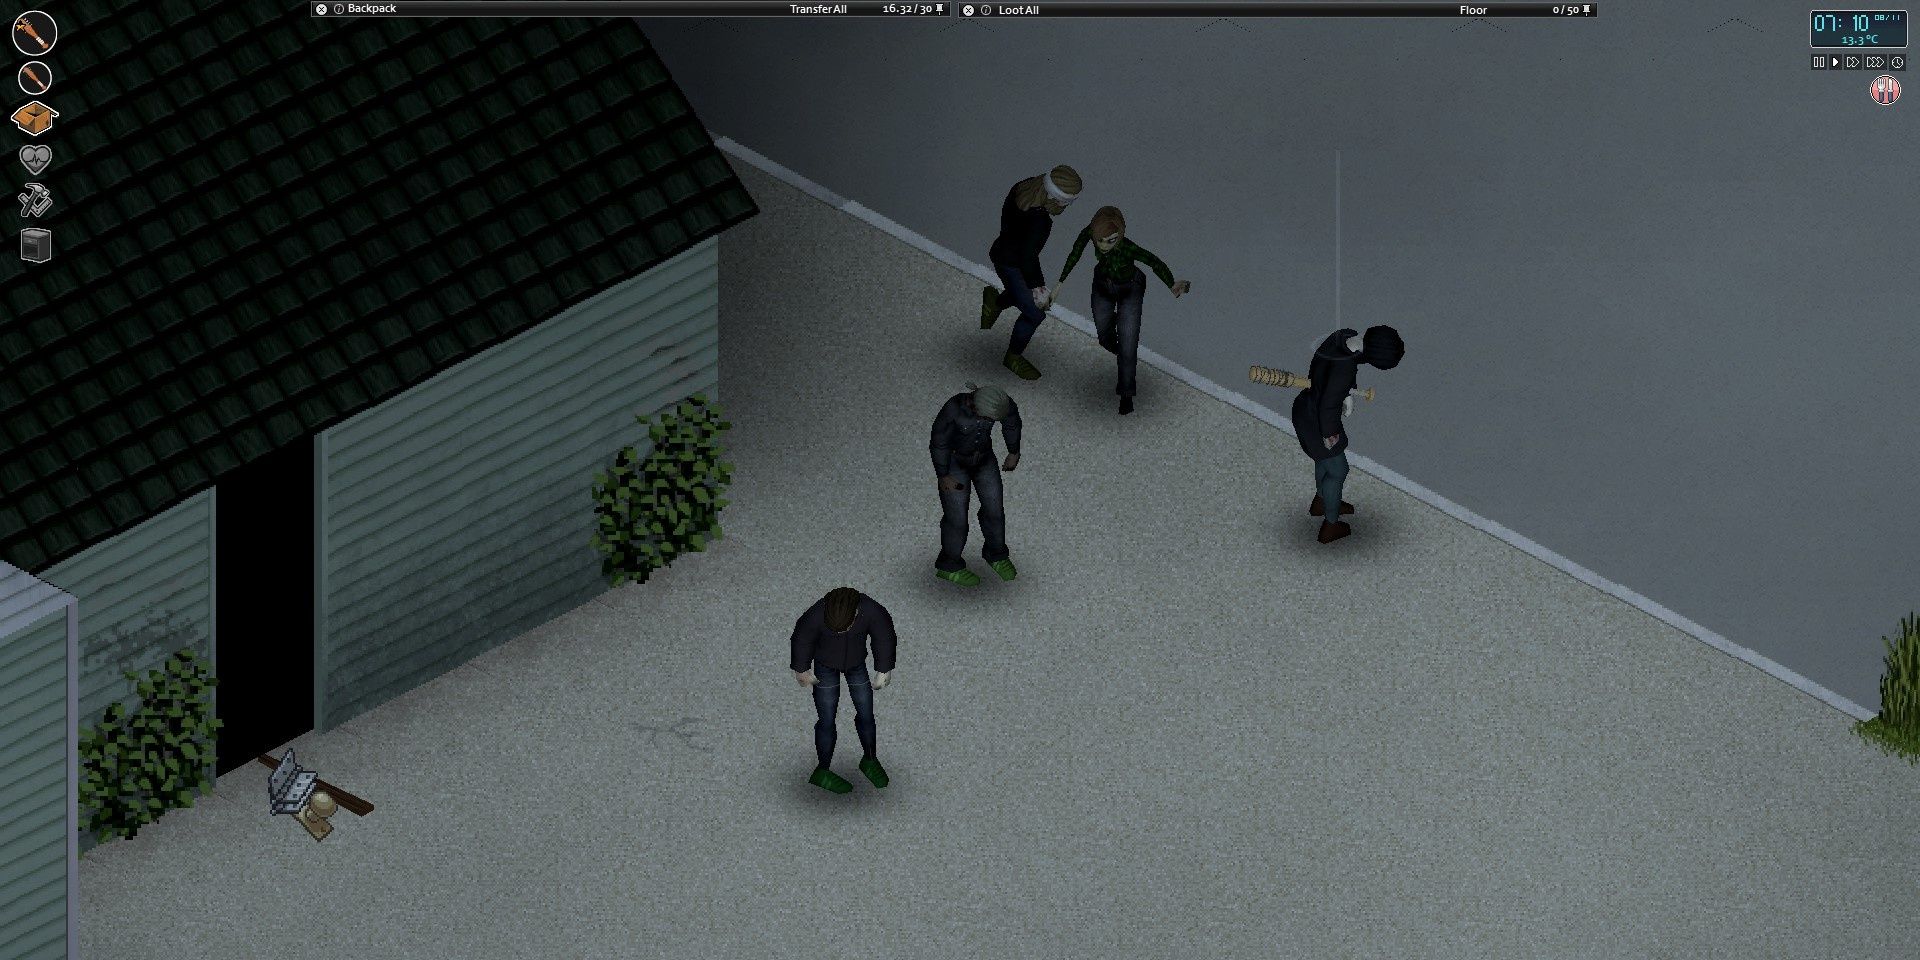 Combat in Project Zomboid